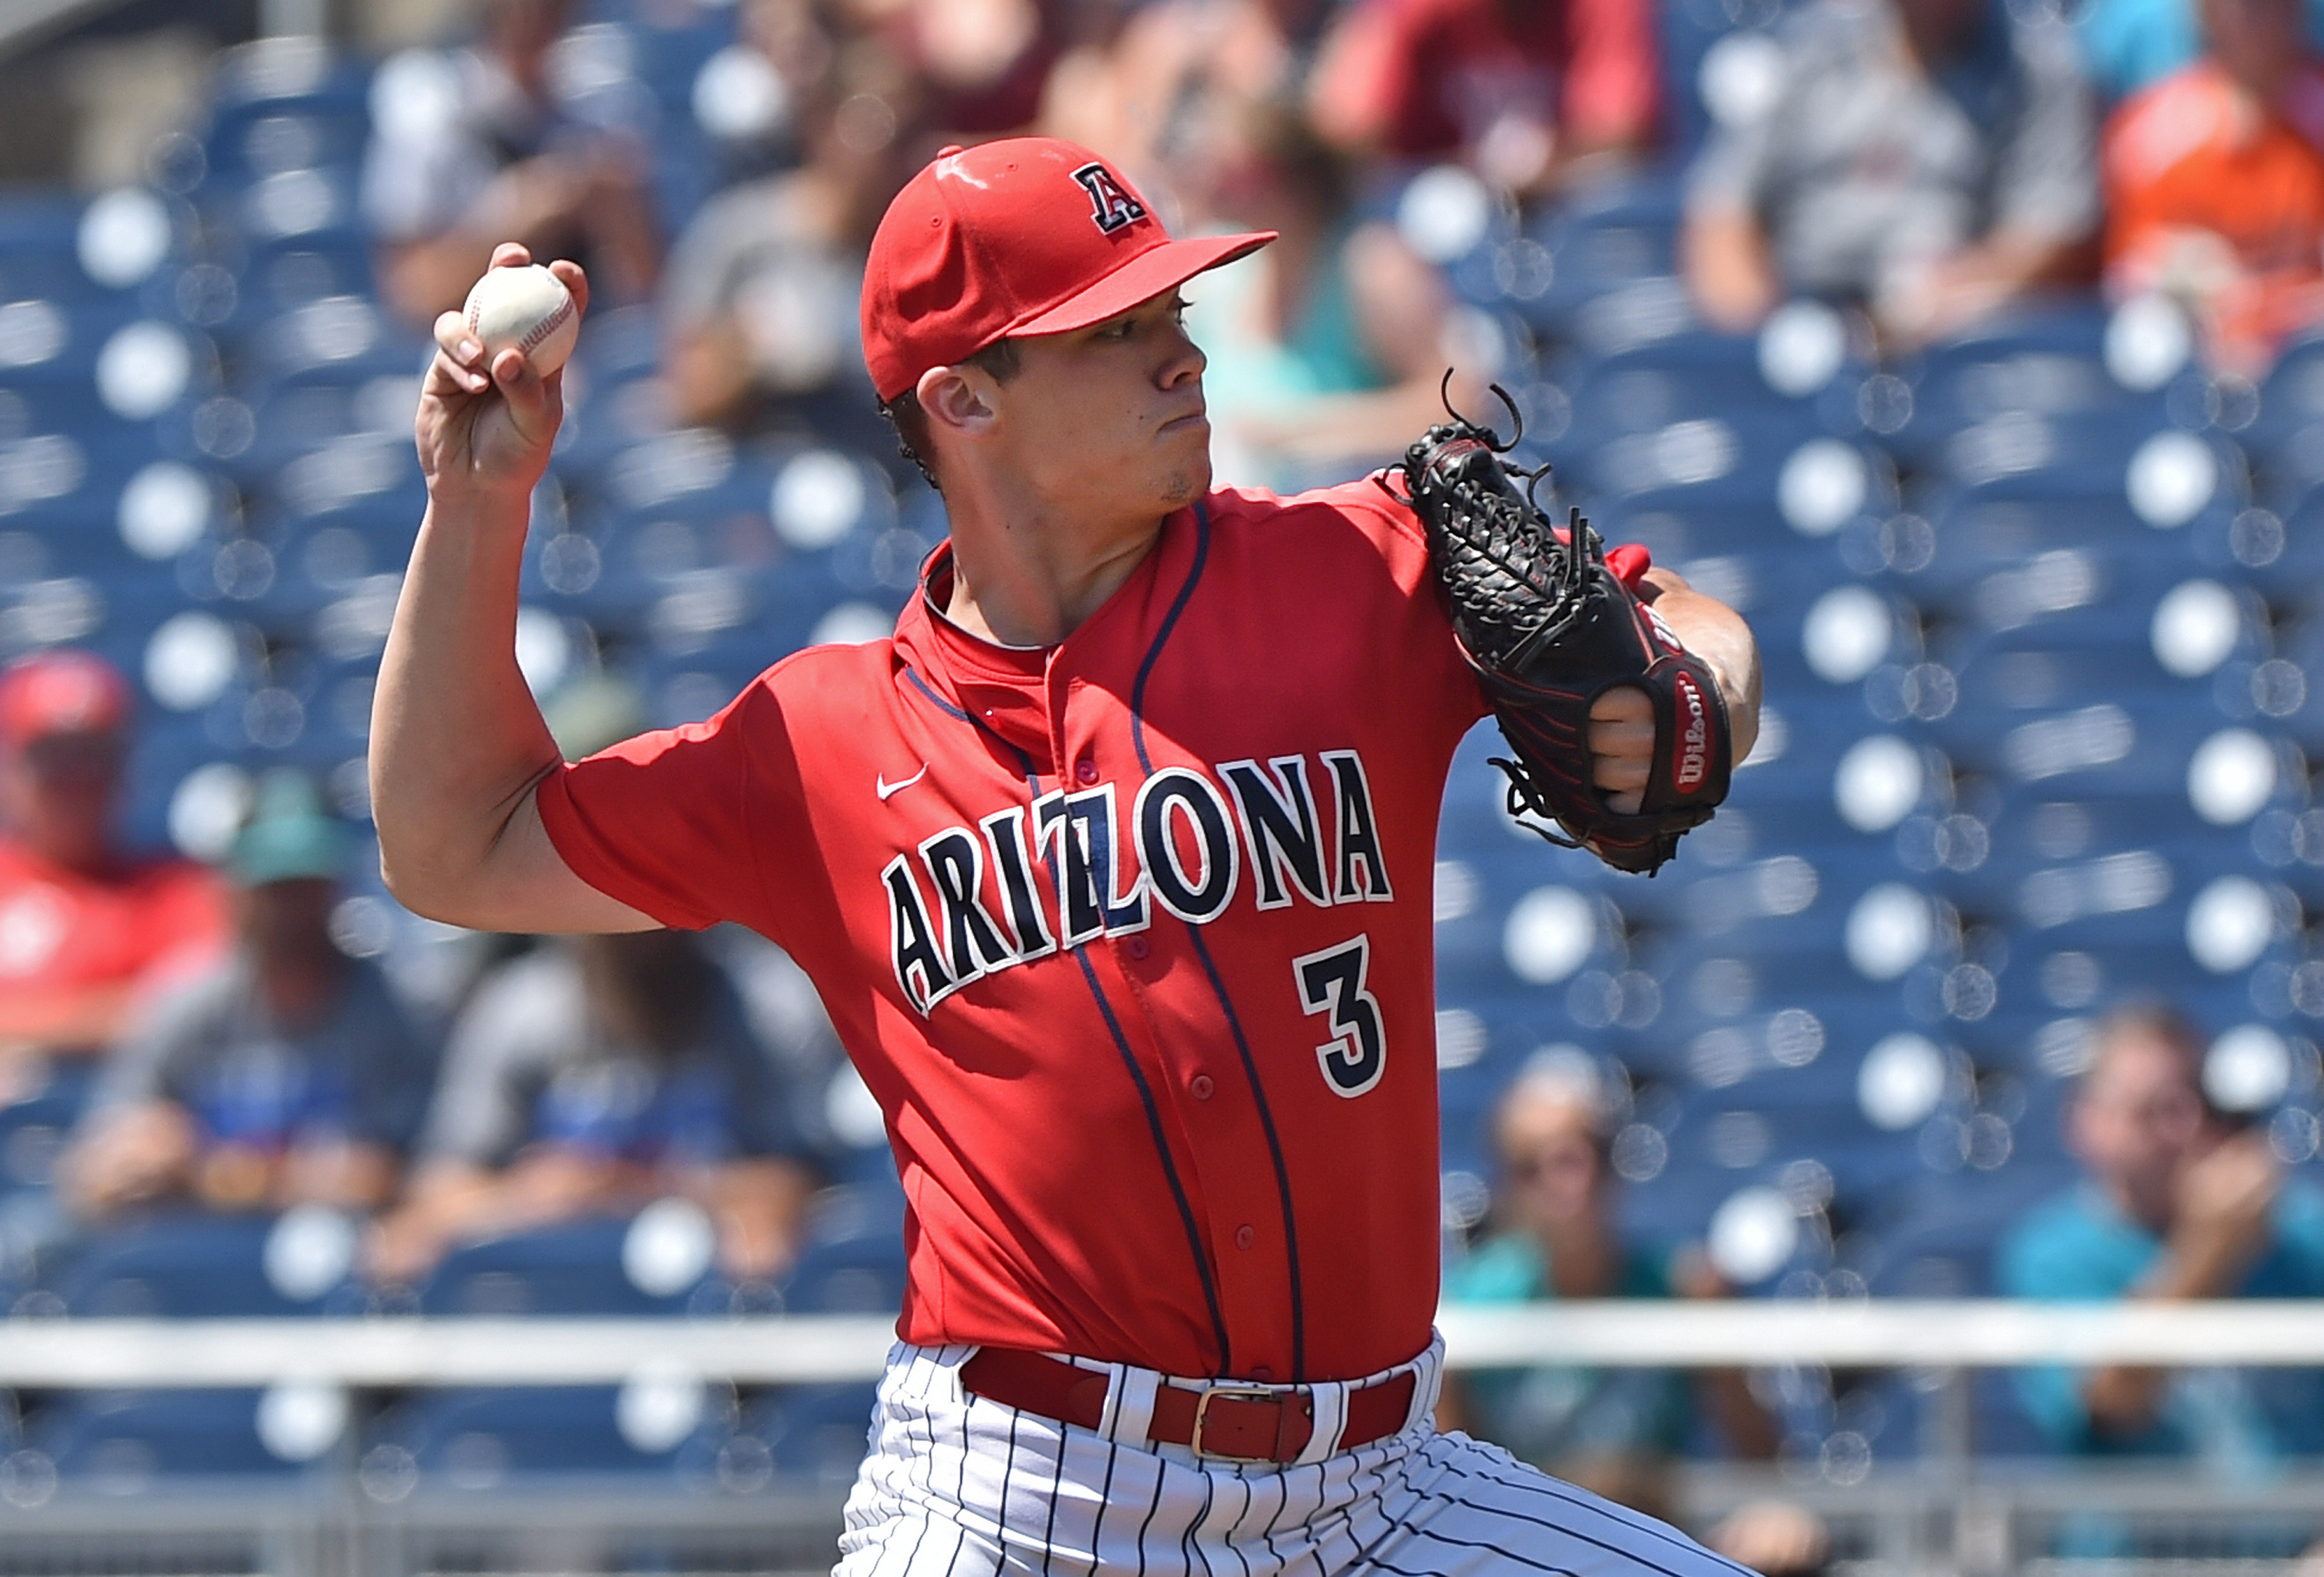 College World Series: Arizona starter Bobby Dalbec is player of the game